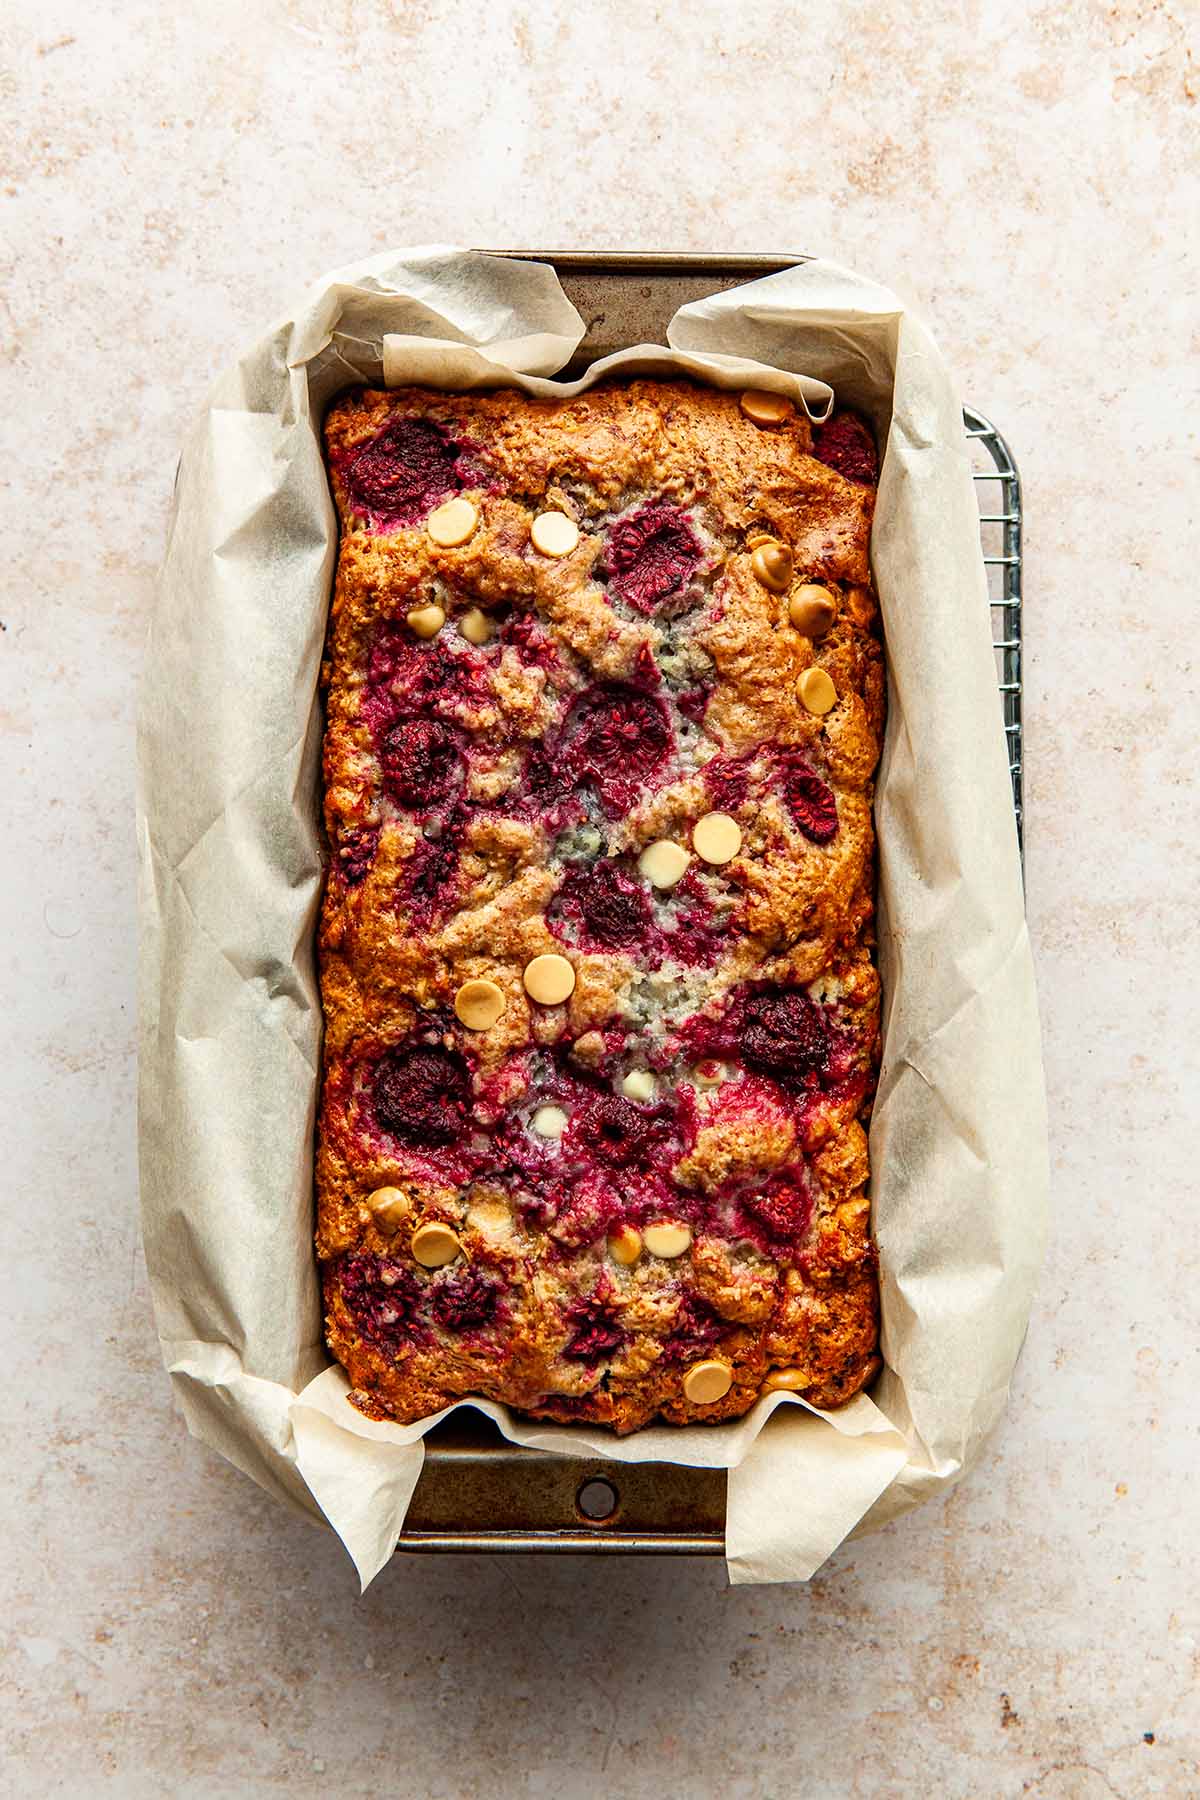 A fully baked raspberry and white chocolate loaf cake still in the loaf tin.